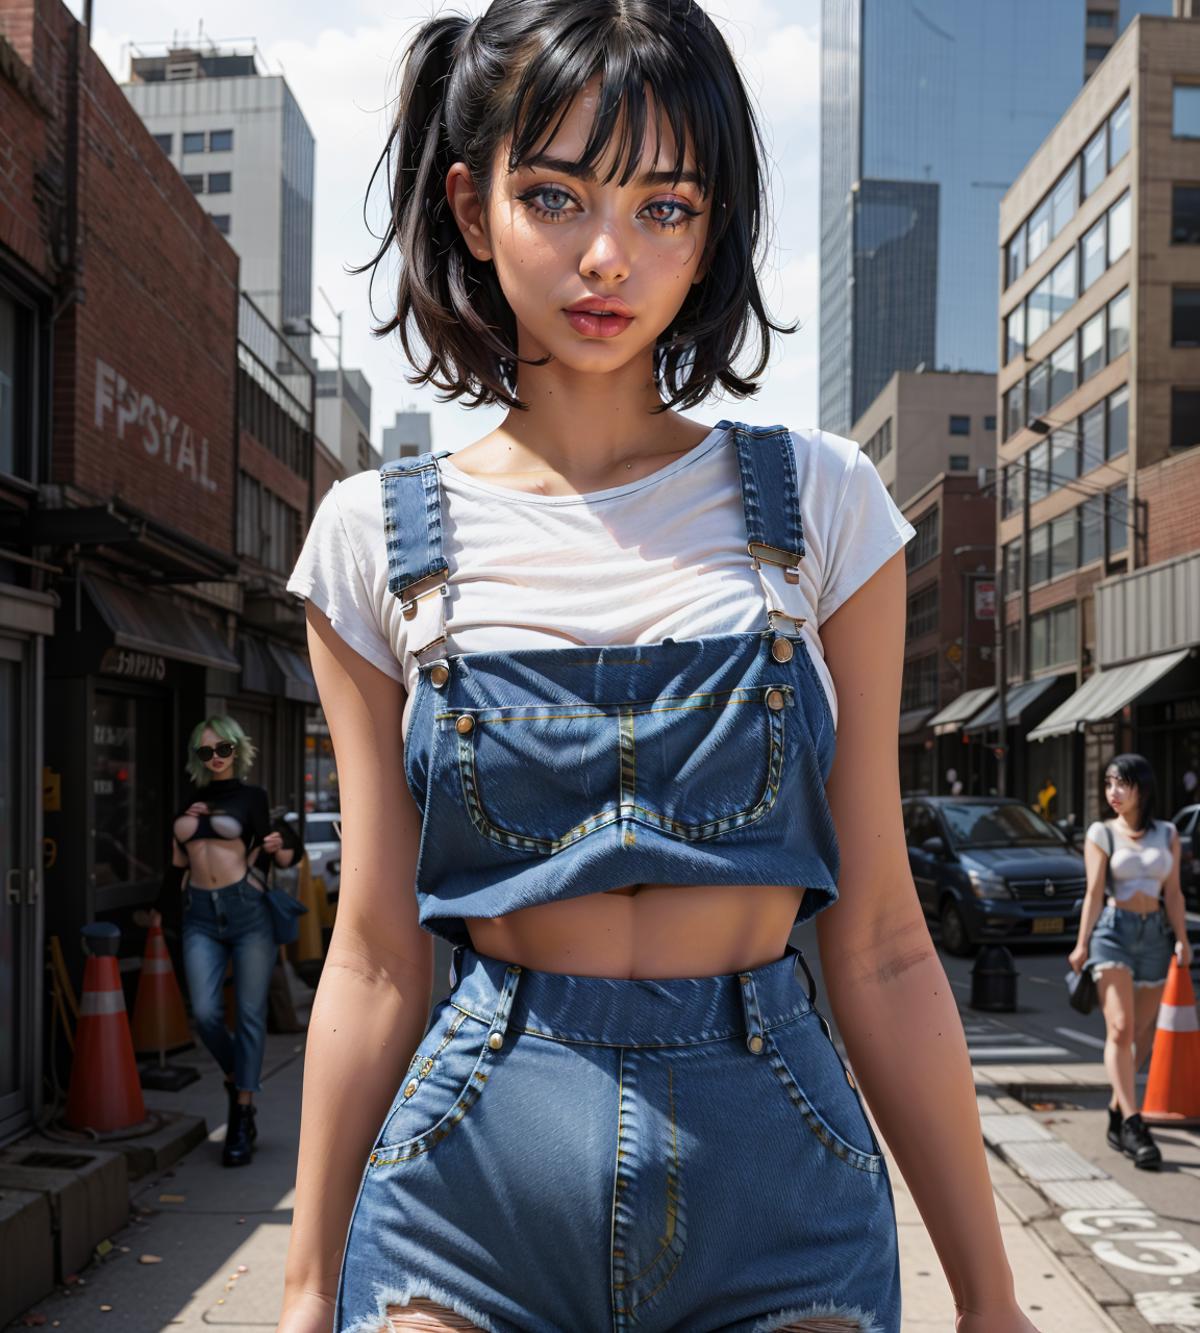 A woman wearing a white shirt and overalls stands confidently on a city street.